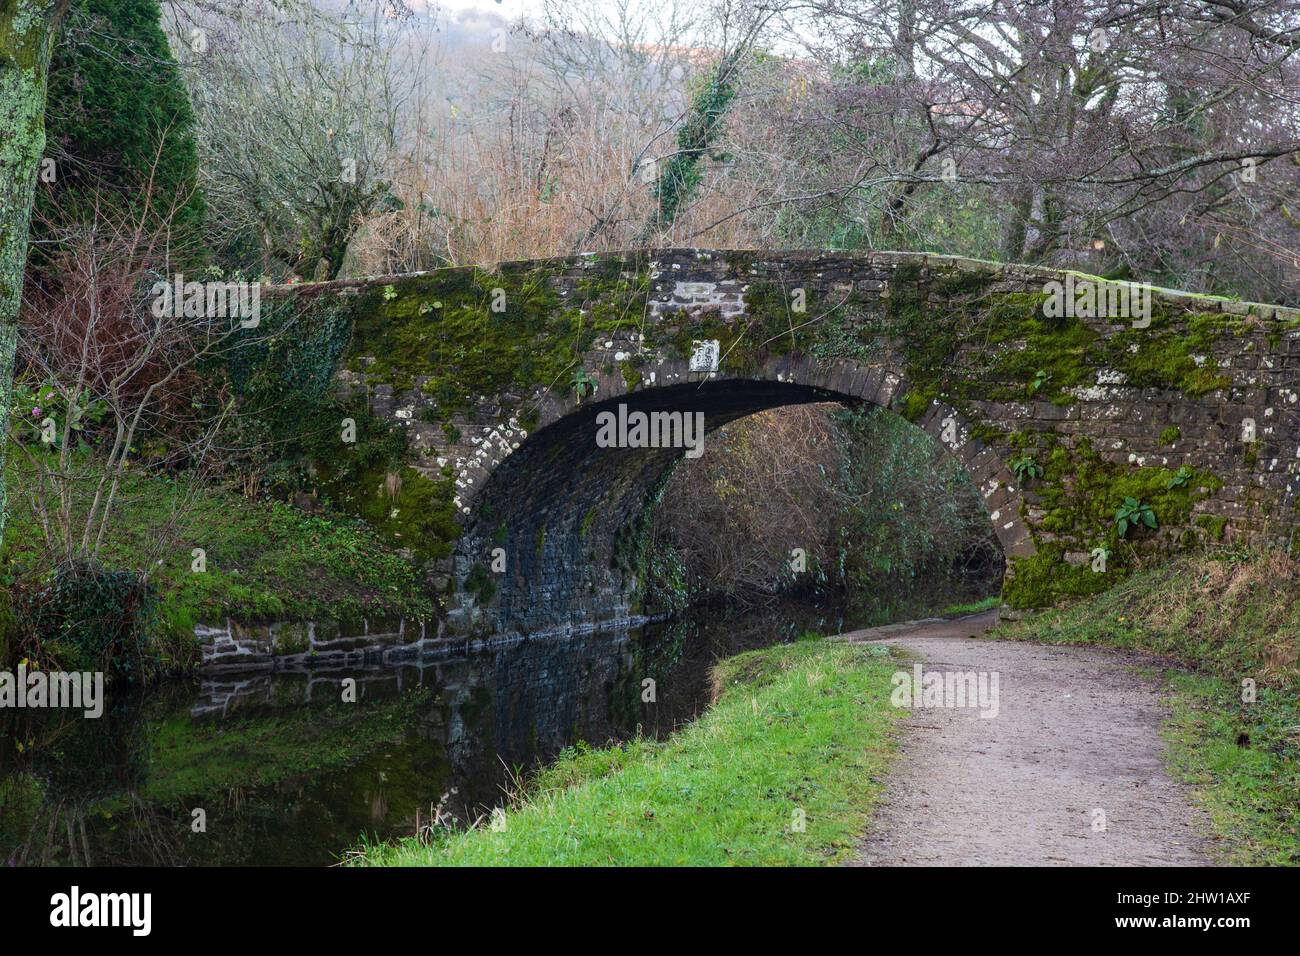 Brücke Nr. 59, Monmouthshire und Brecon Canal, Monmouthshire. Stockfoto